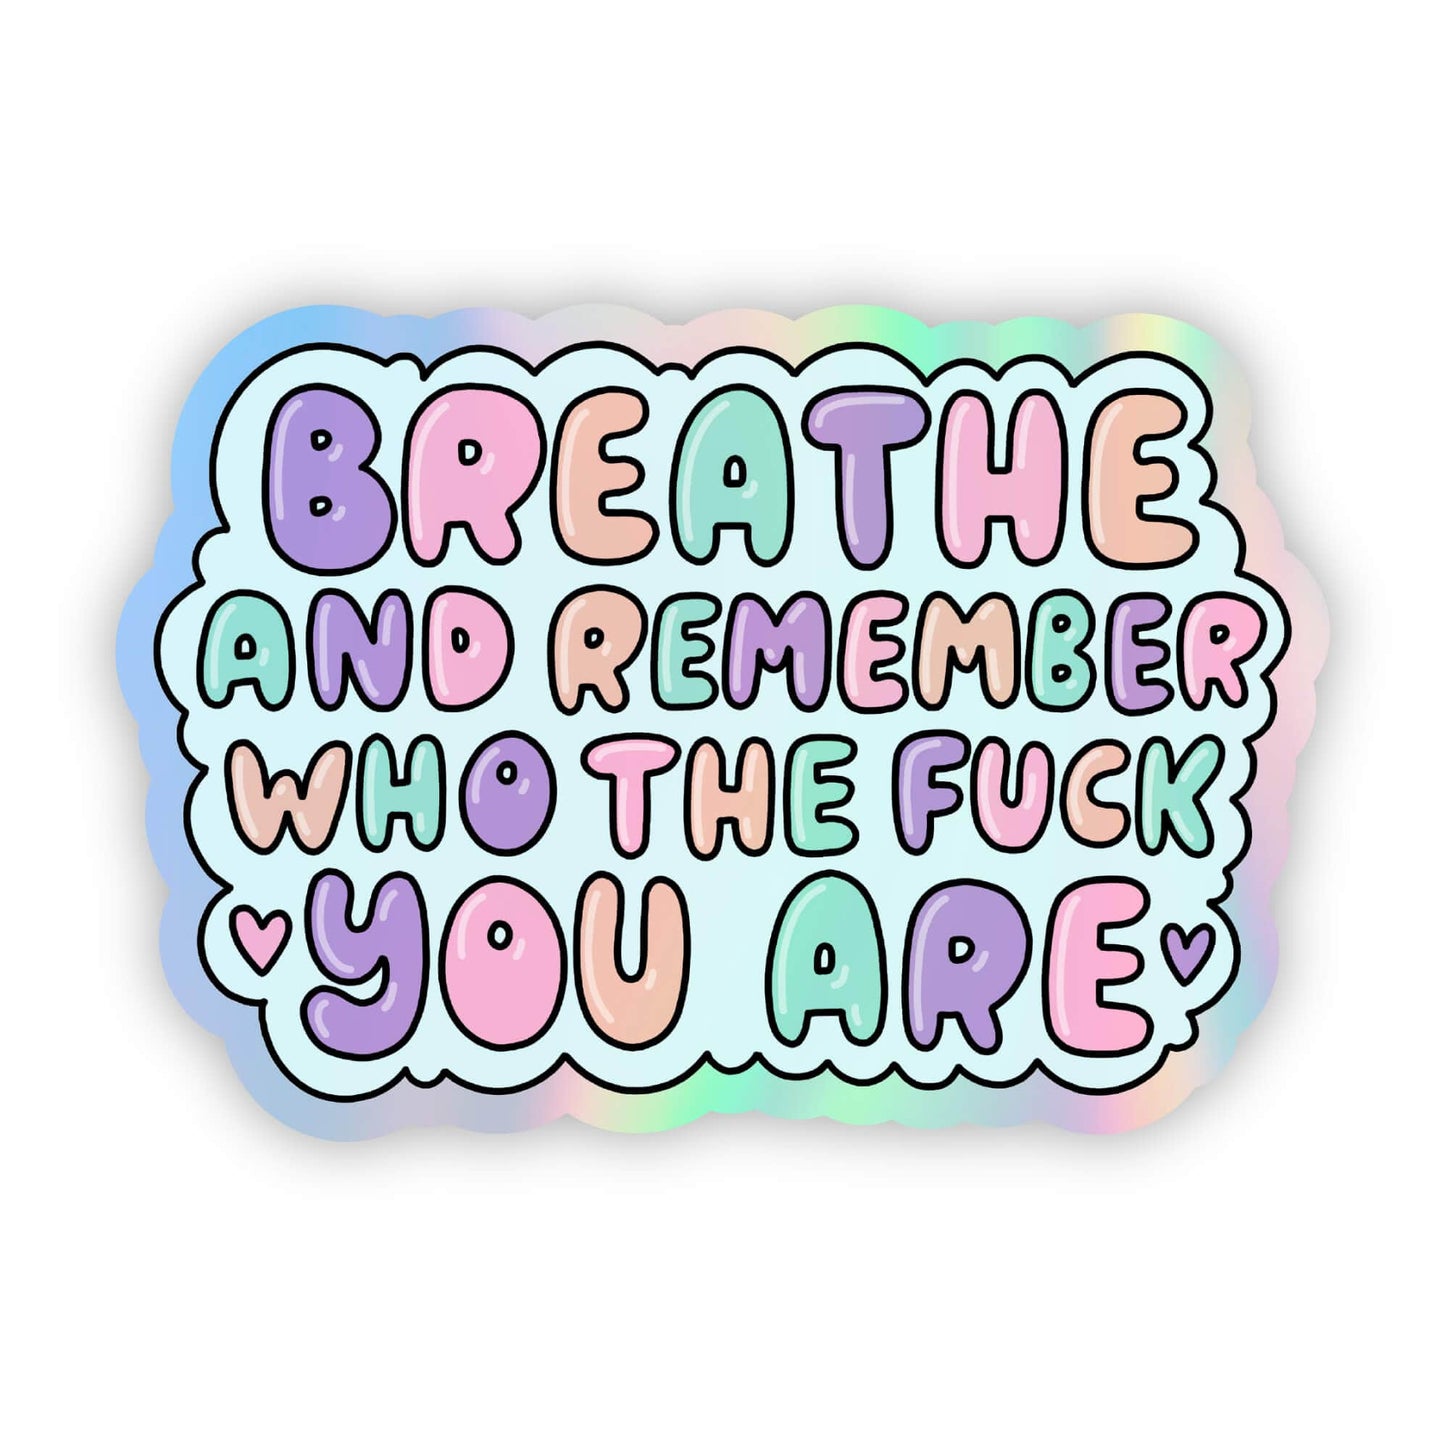 Breathe and remember who the f*ck you are holographic sticker